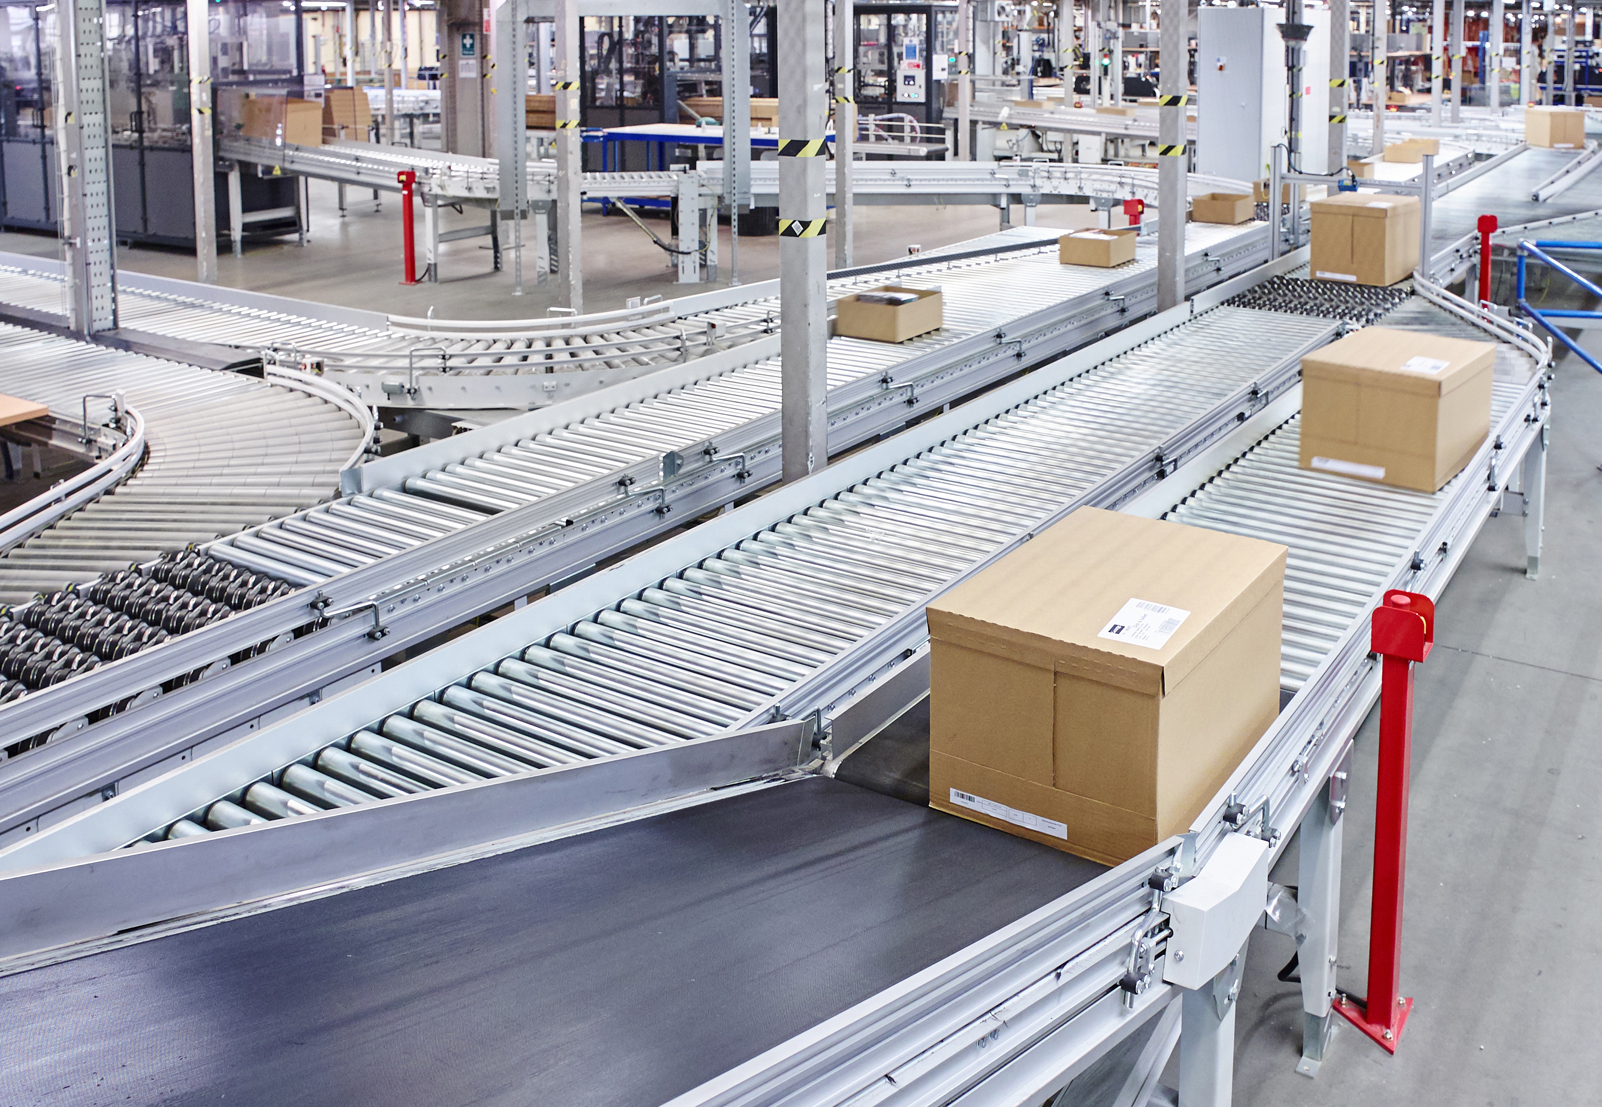 Axiom GB Ltd supplies a range of conveyor modules and types for all requirements. A system is a combination of elements to deliver a solution. Let’s talk…. We’d love to help you solve your materials handling challenges. www.axiomgb.com sales@axiomgb.com +44(0)1827 61212